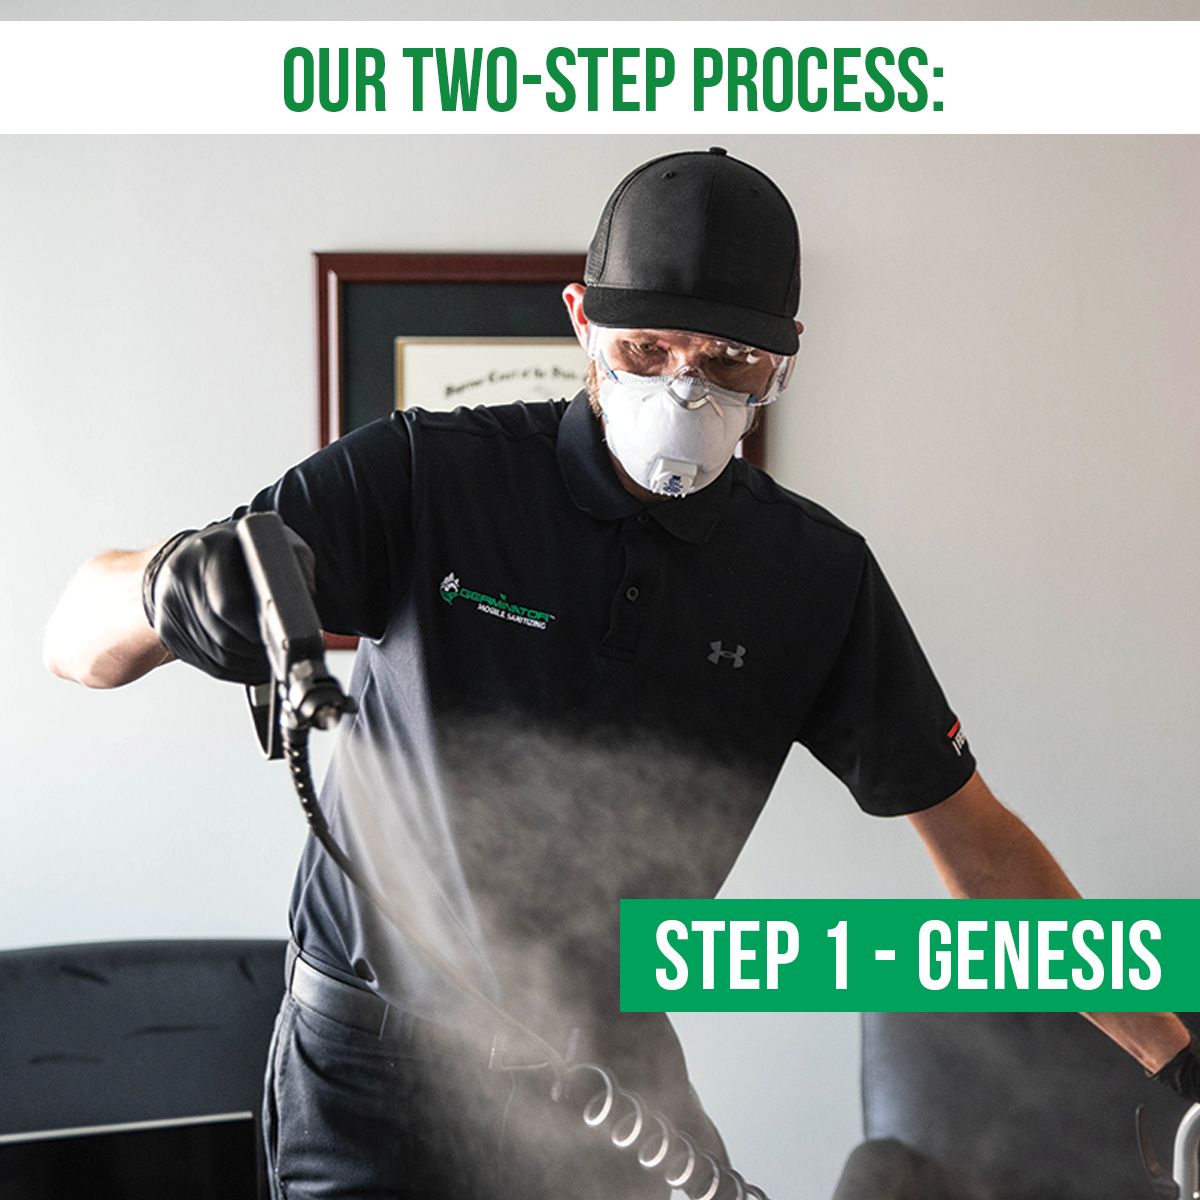 Our Two-Step Process: Step 1 - Genesis